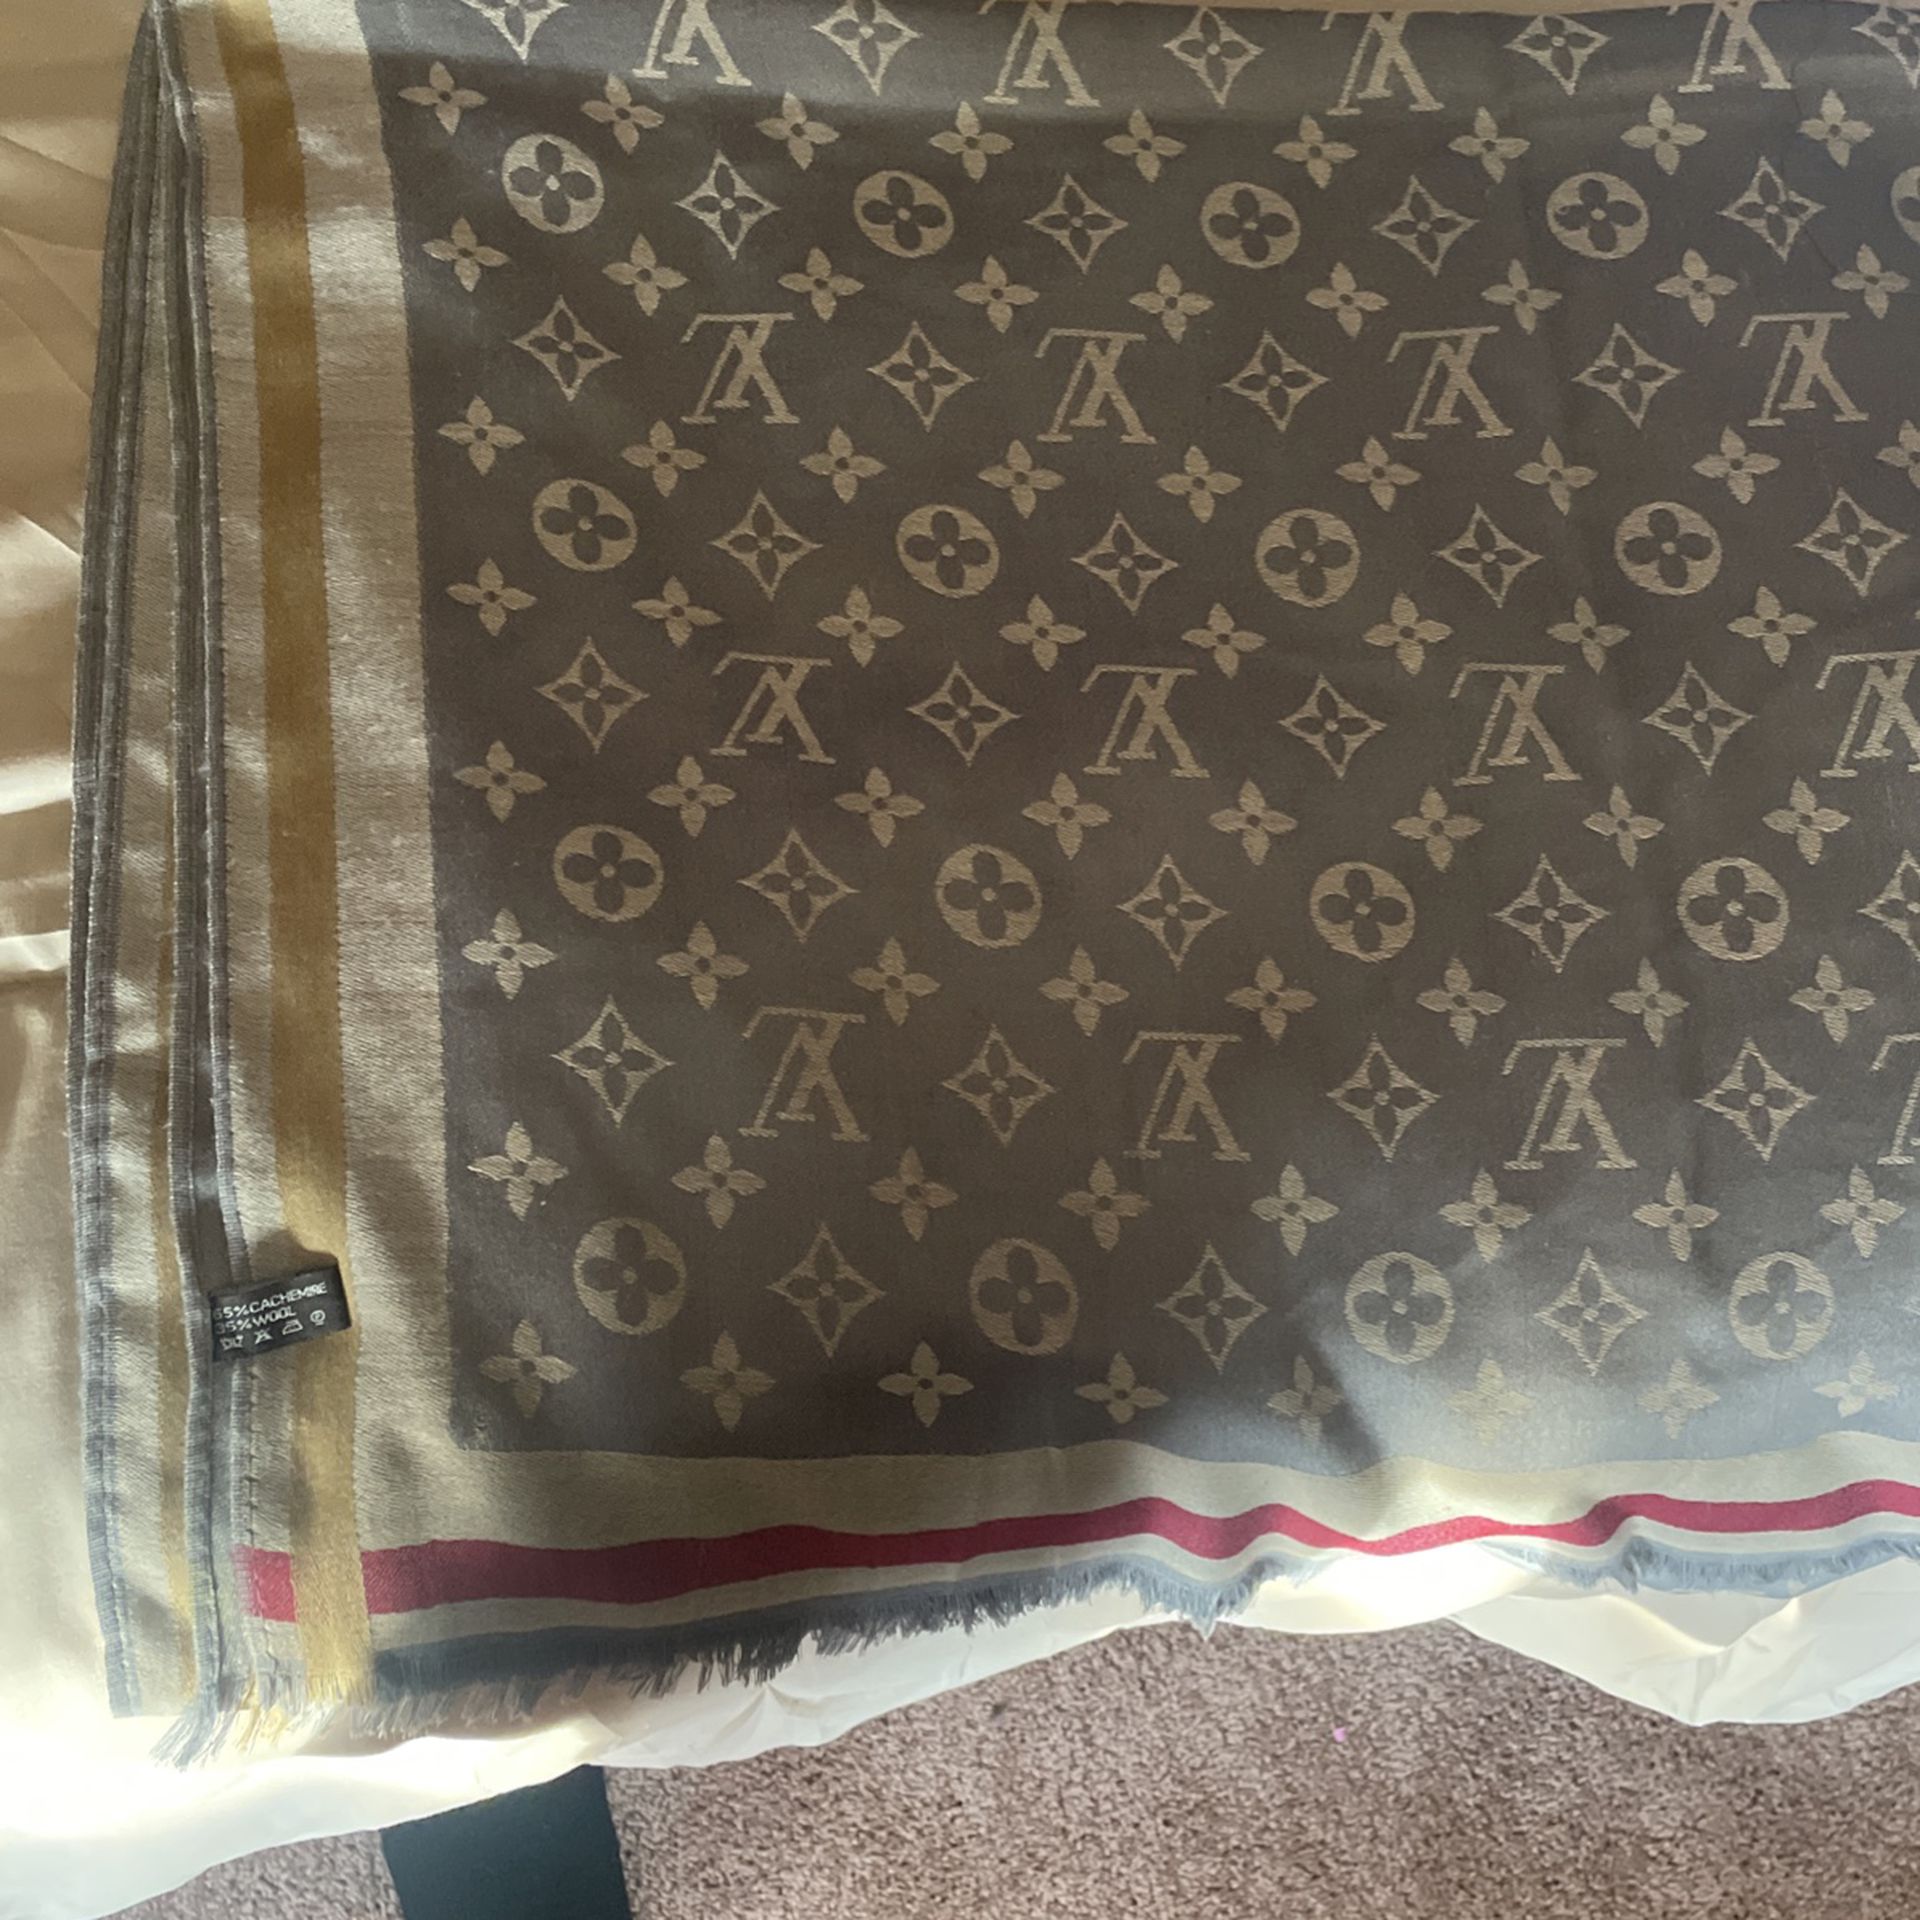 Louis vuitton scarf for sale - New and Used - OfferUp